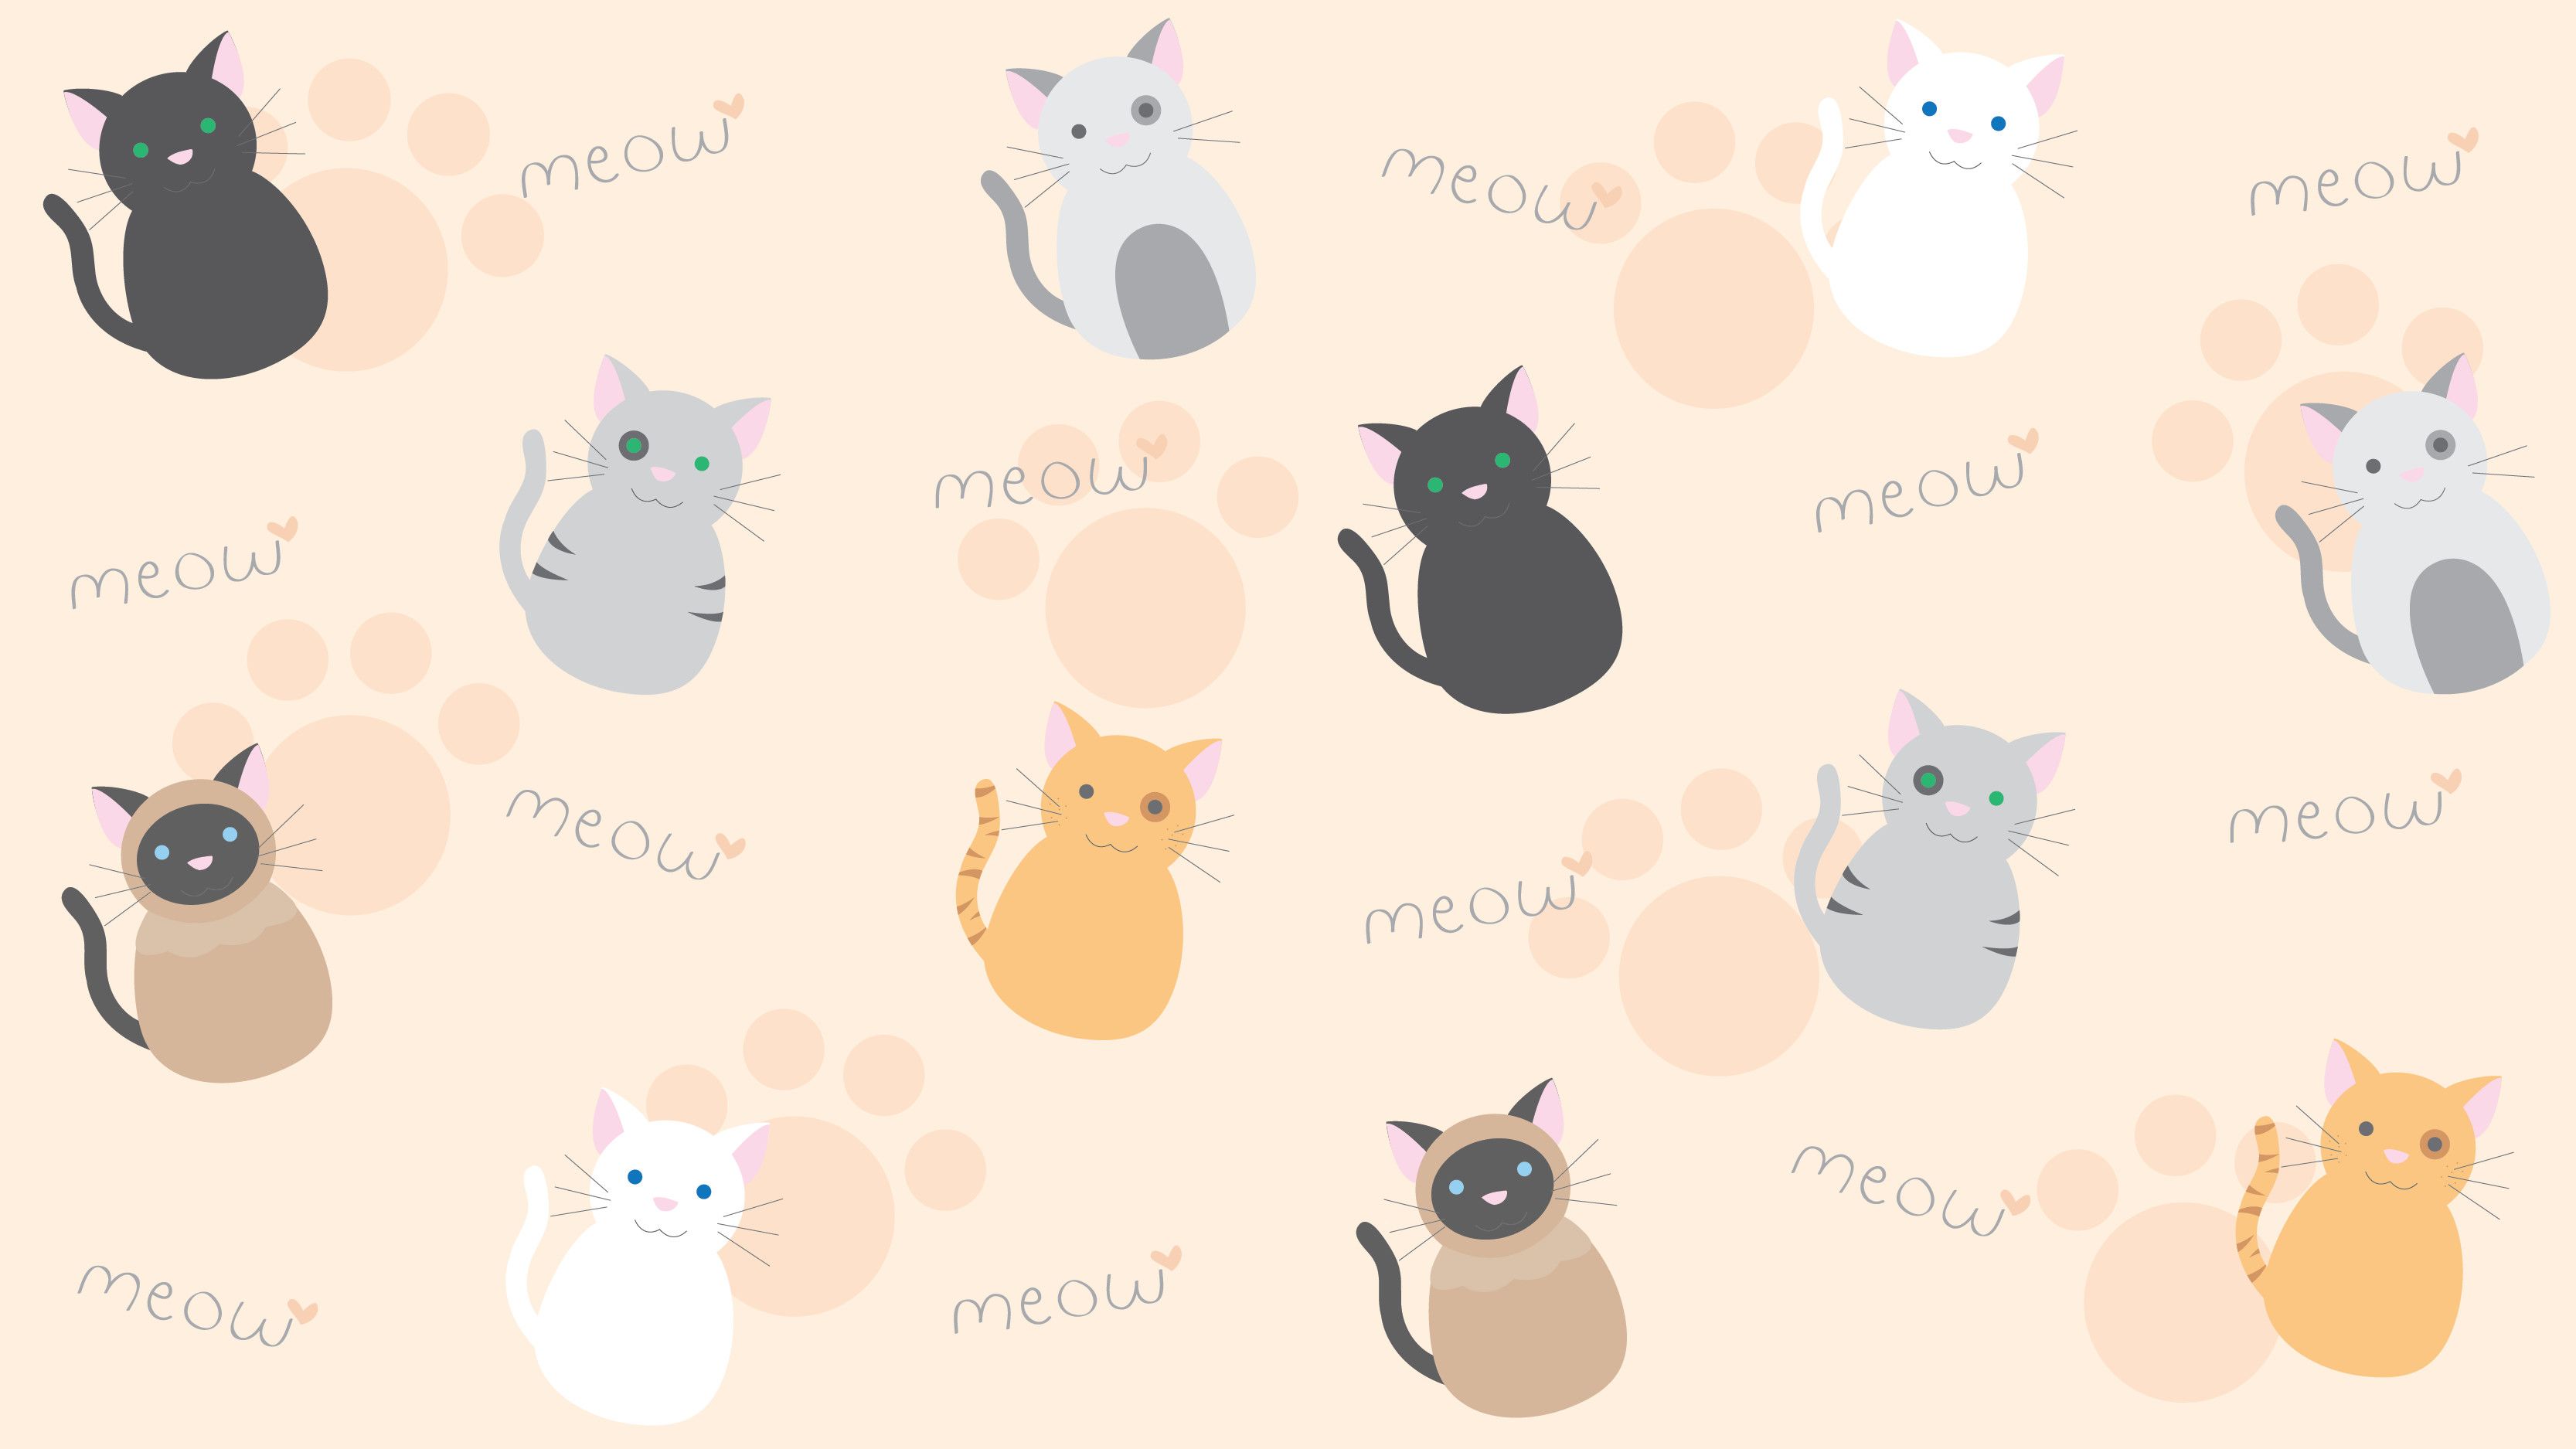 A pattern of cats and paw prints - Cat